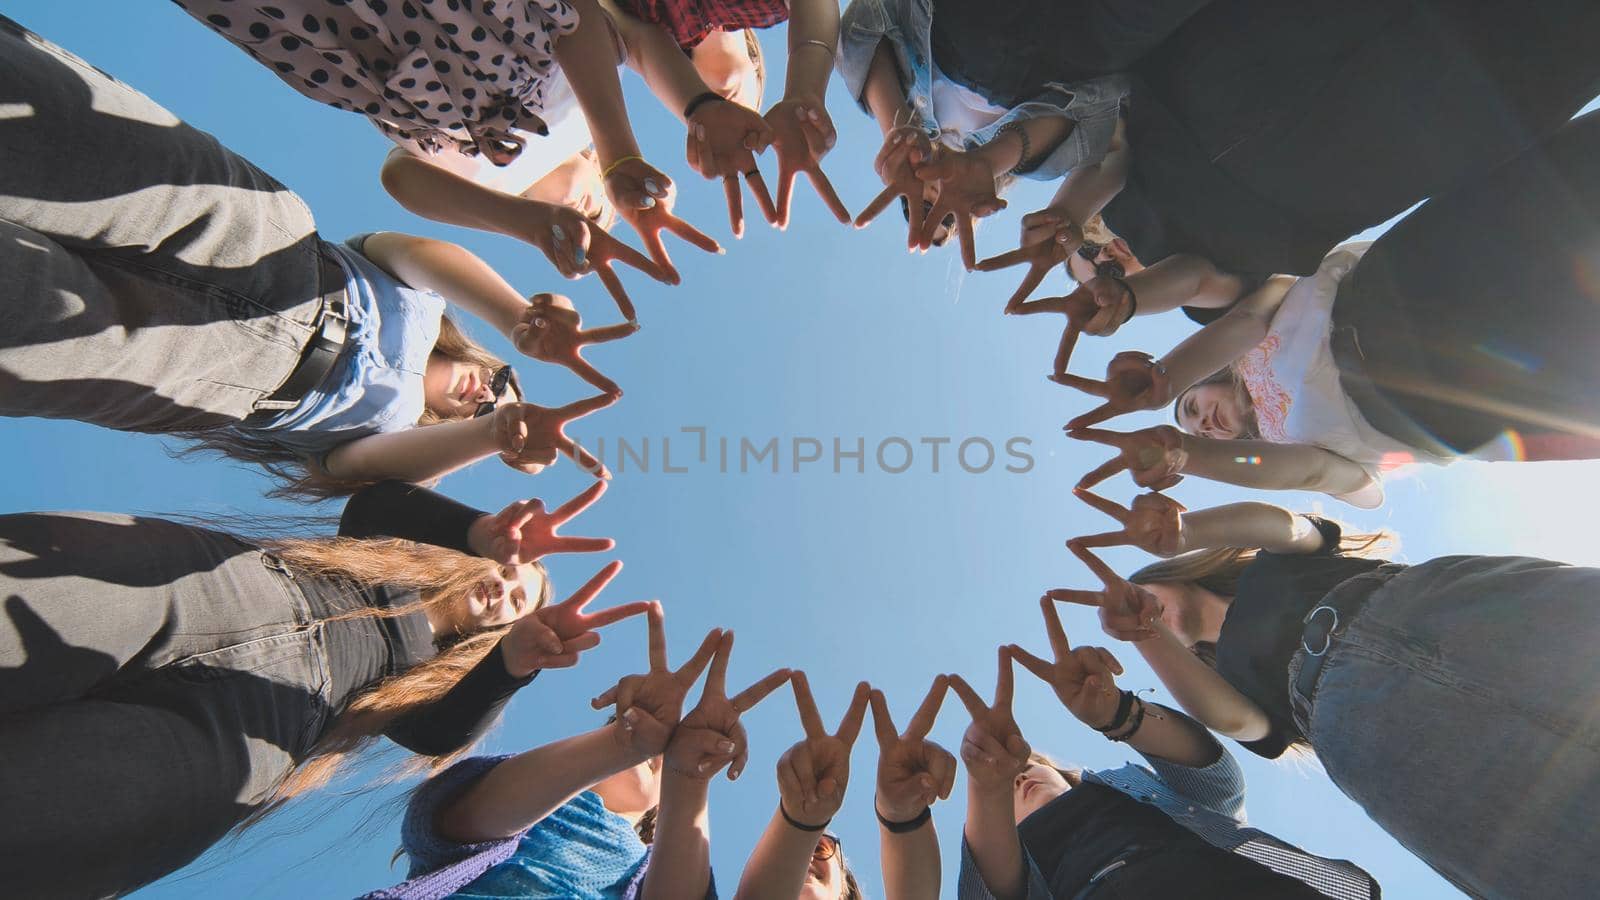 A group of girls makes a circle from their fingers